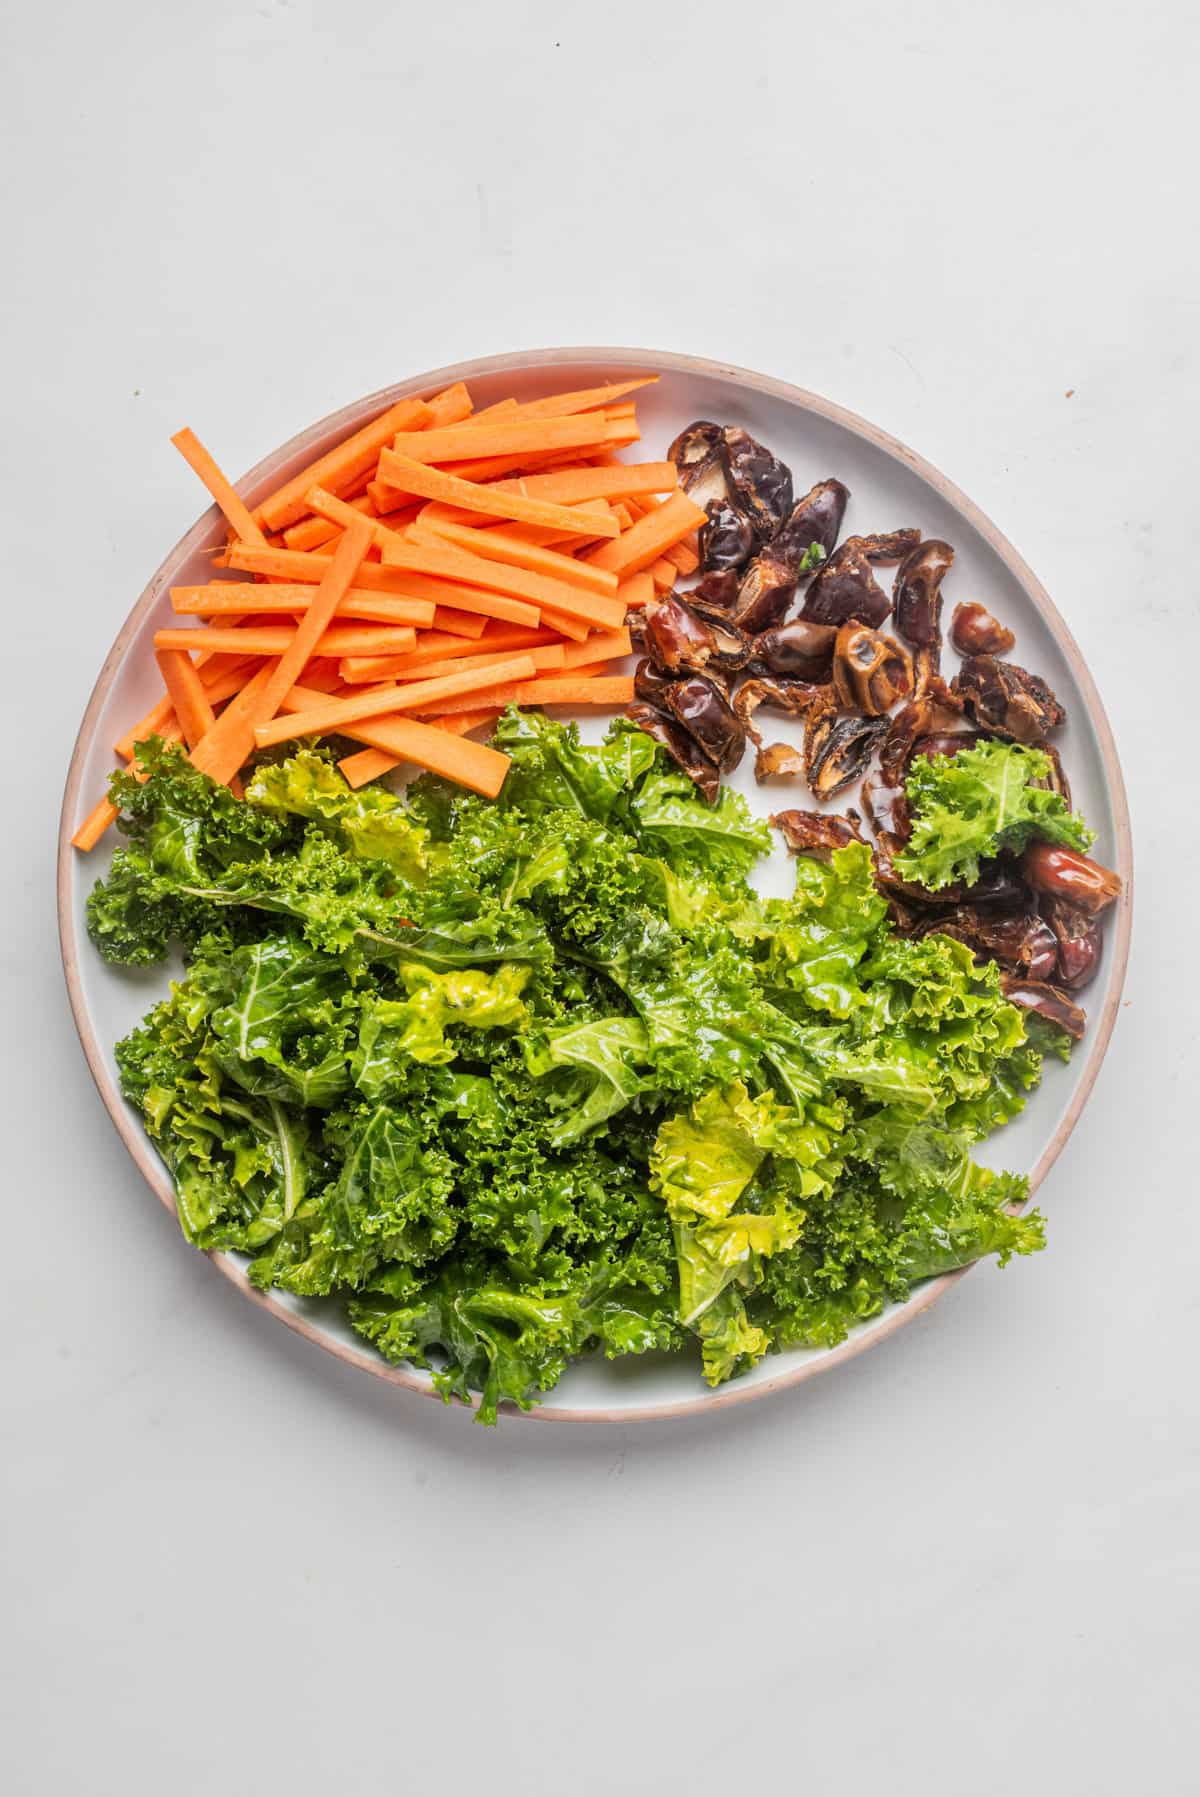 An image of carrots, kale, and walnuts side by side on a plate.